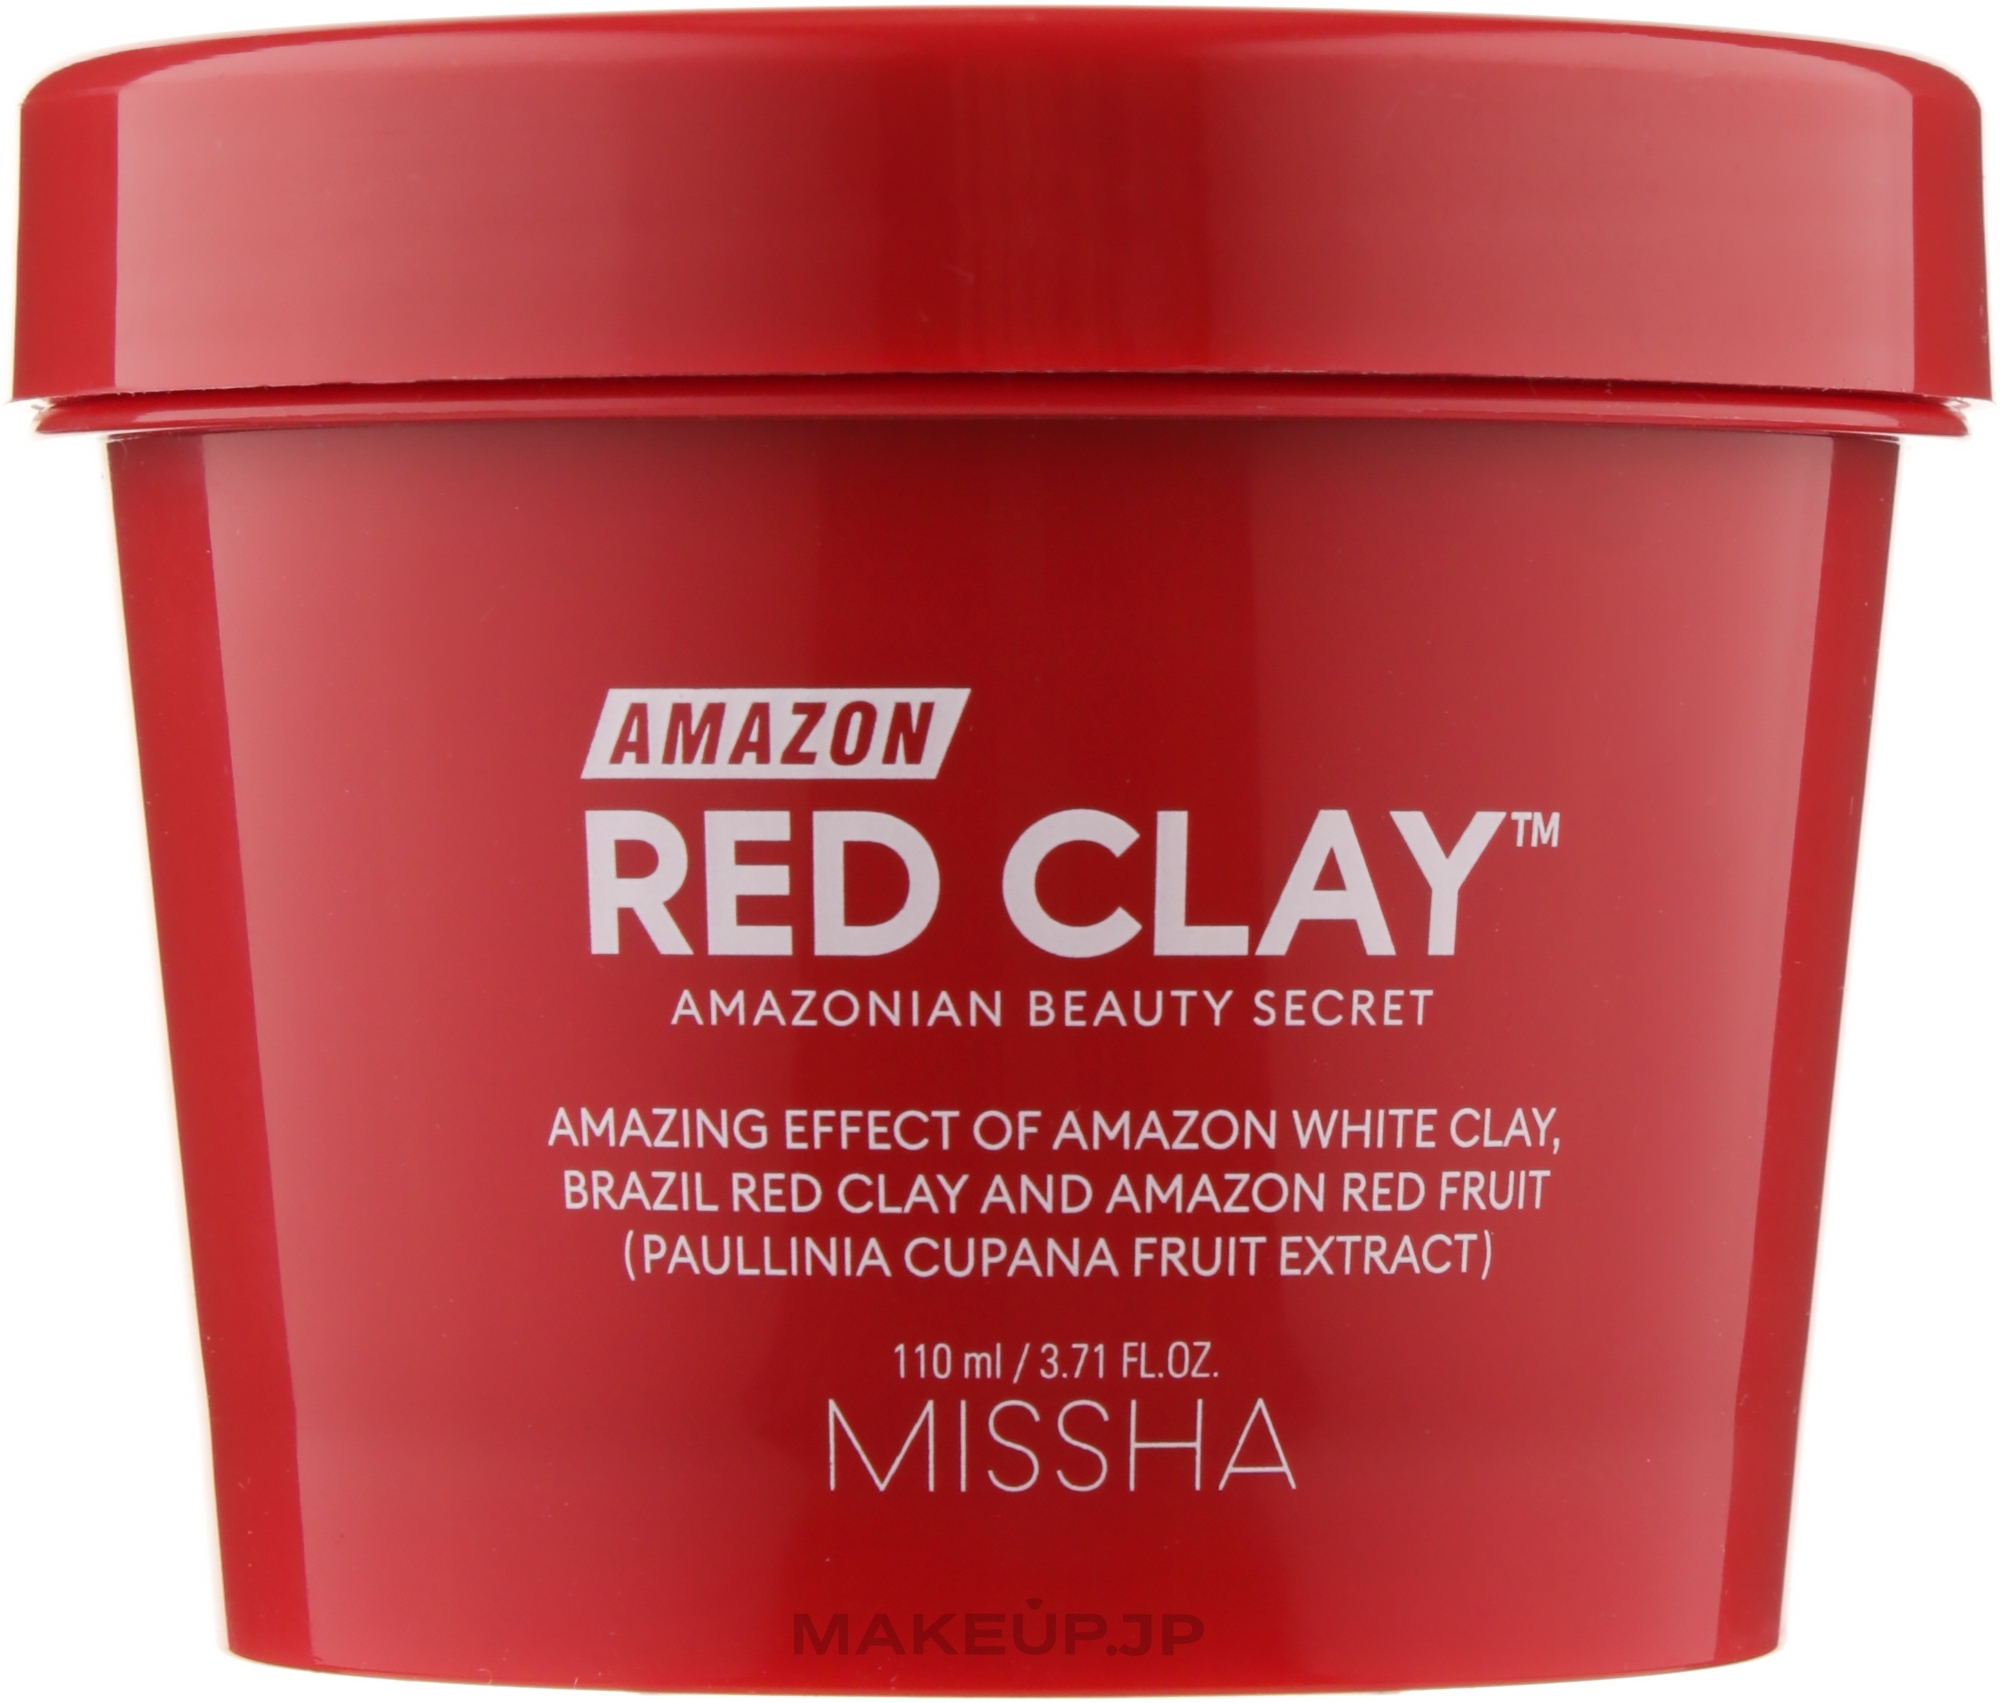 Red Clay Face Mask - Missha Amazon Red Clay Pore Mask — photo 110 ml